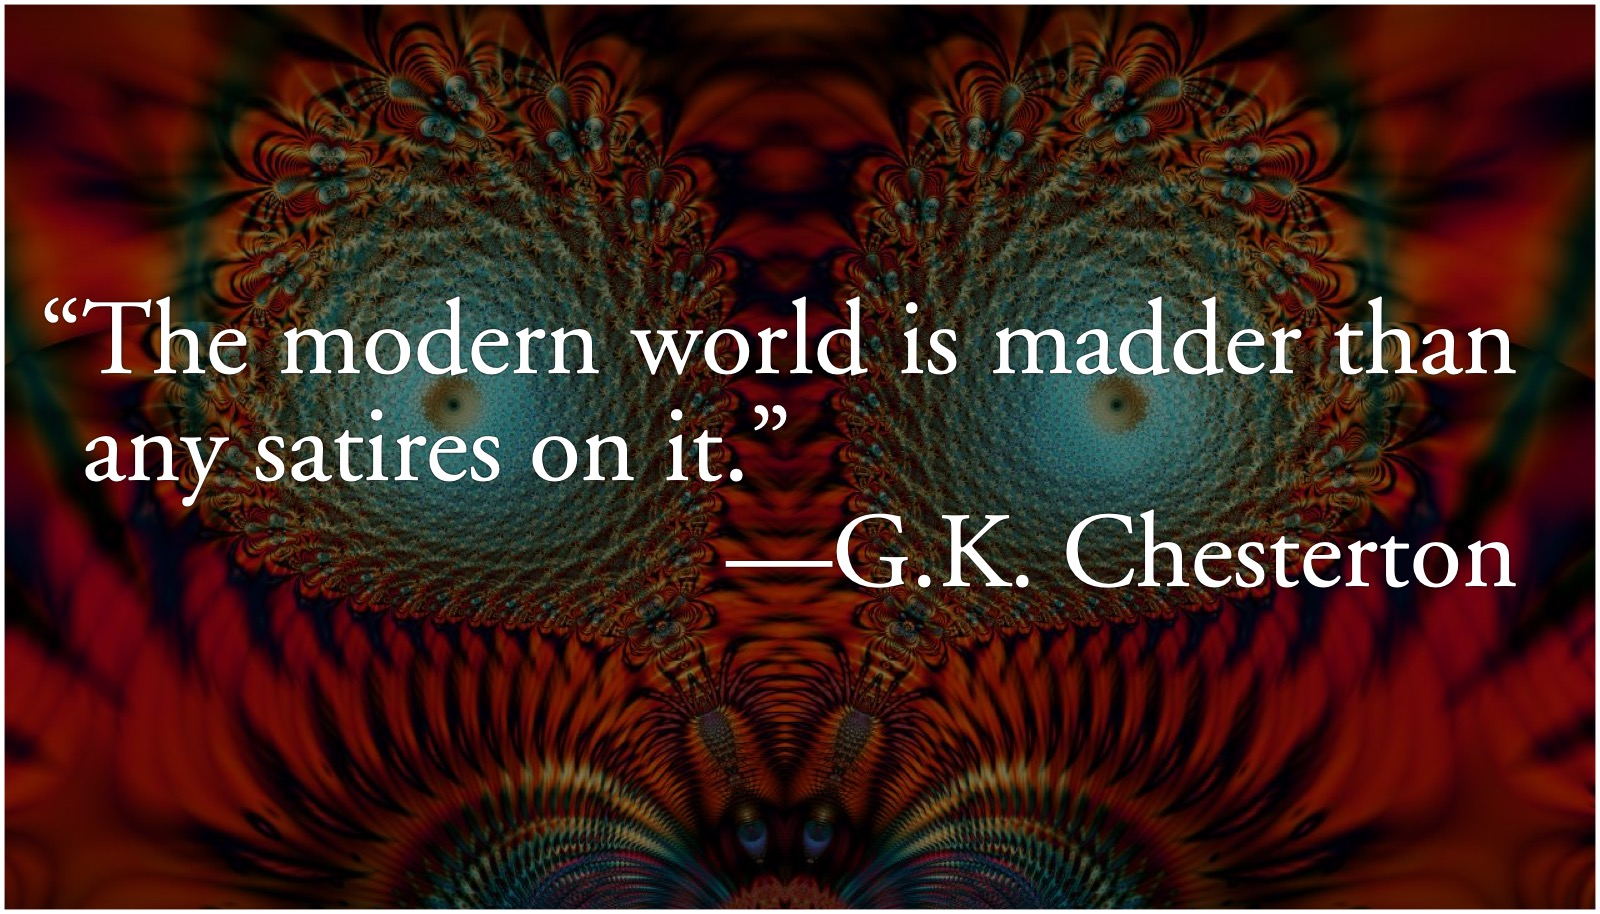 Chesterton: The modern world is mad: G. K. Chesterton’s “The modern world is madder than any satires on it.” from The Everlasting Man.; satire; G. K. Chesterton; New Barbarism; re-primitivization